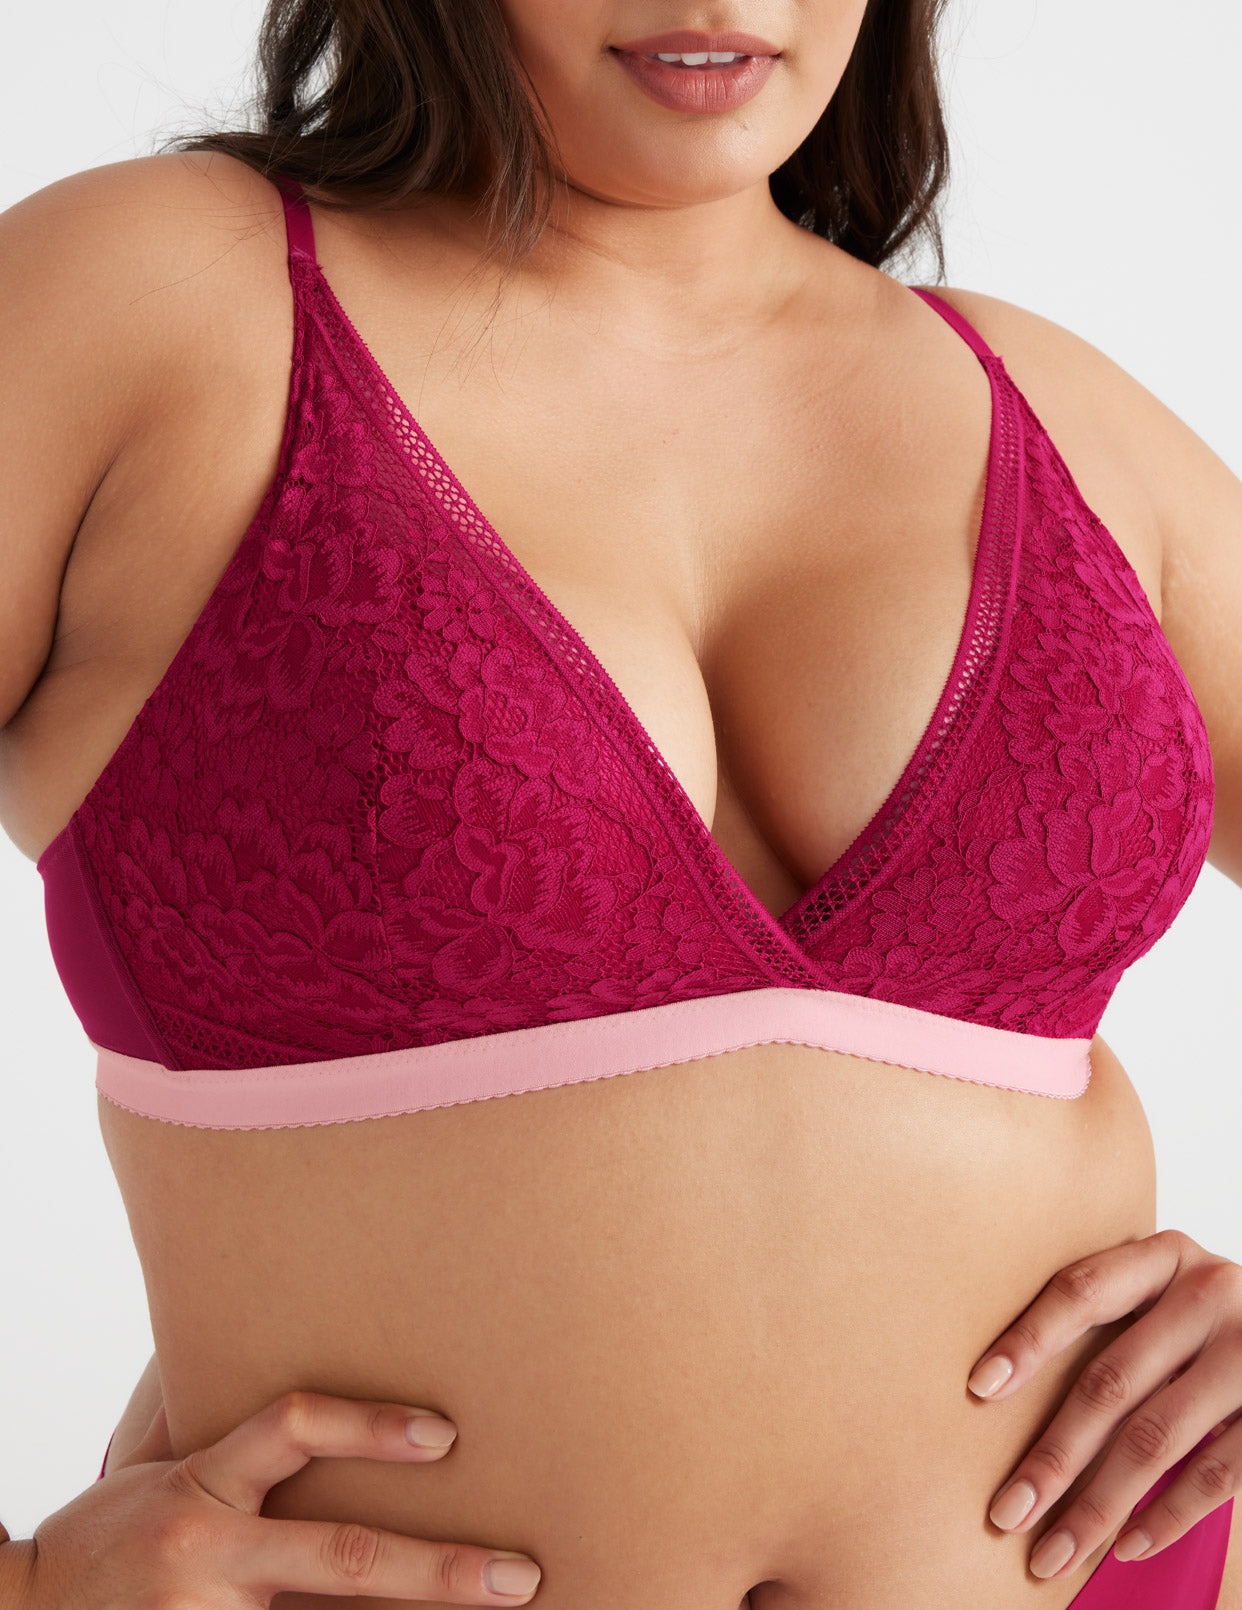 How Should A Bra Fit? A Handy Guide For Finding Your Perfect Bra – Knix